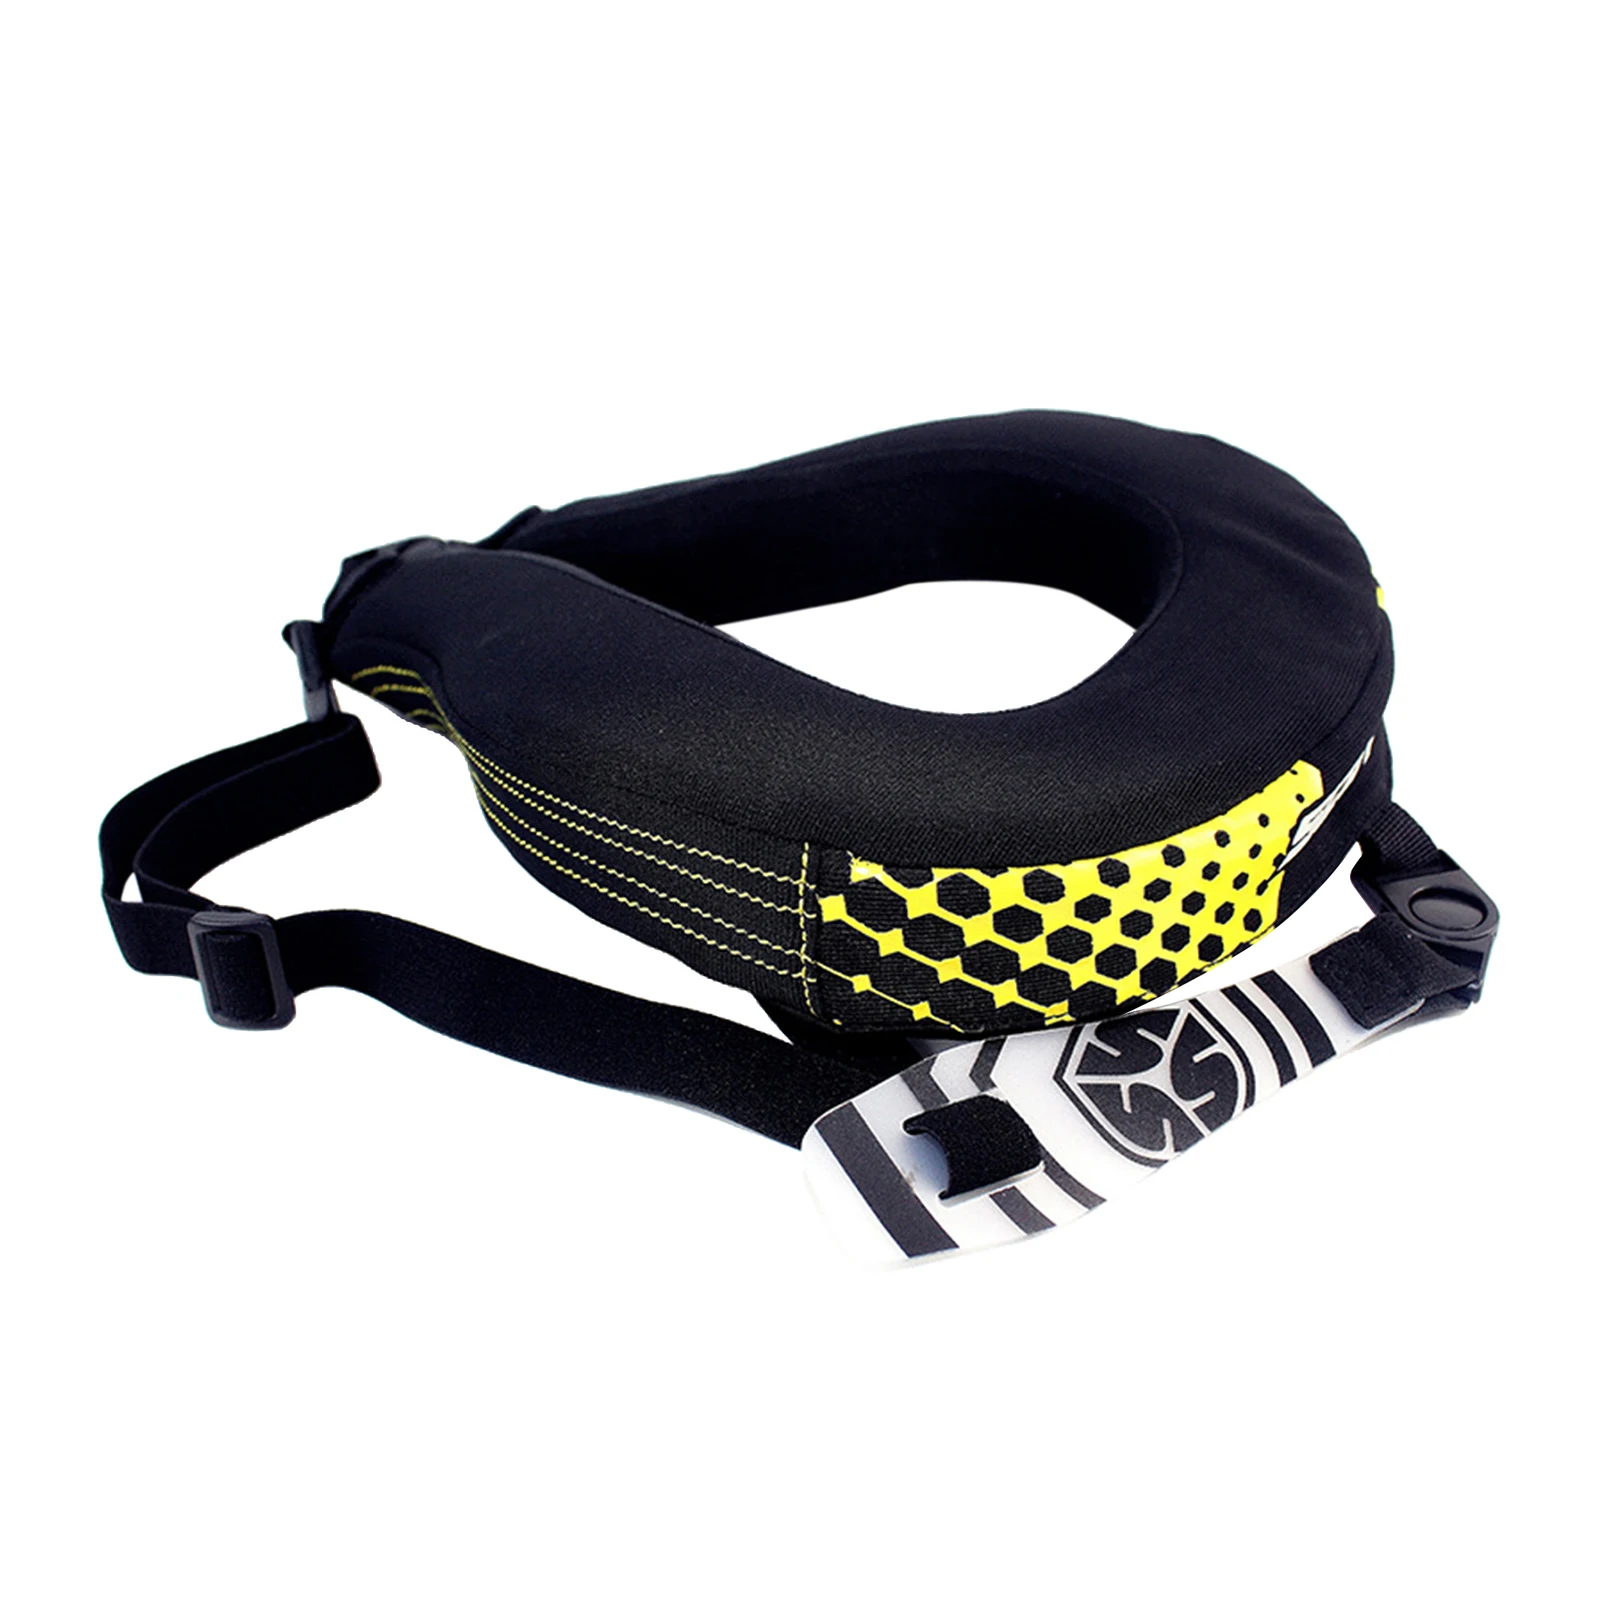 Sports R2 Race Collar Off-Road Dirt Bike One Size Neck Protector Brace